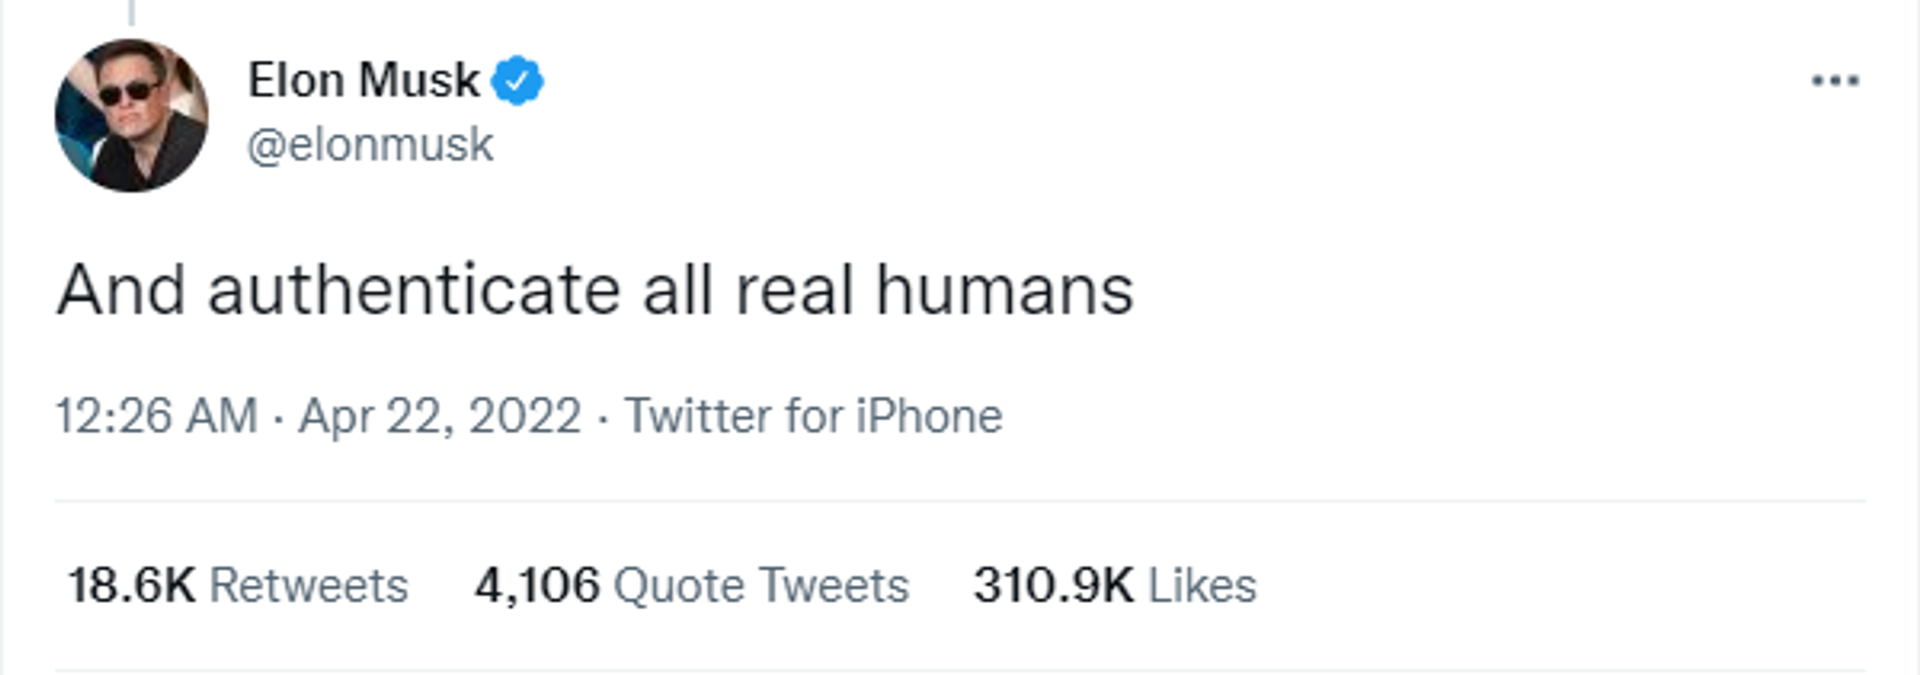 Tesla Founder Elon Musk Vows to Authenticate Real Human after Twitter Acquisition - Sputnik International, 1920, 22.04.2022